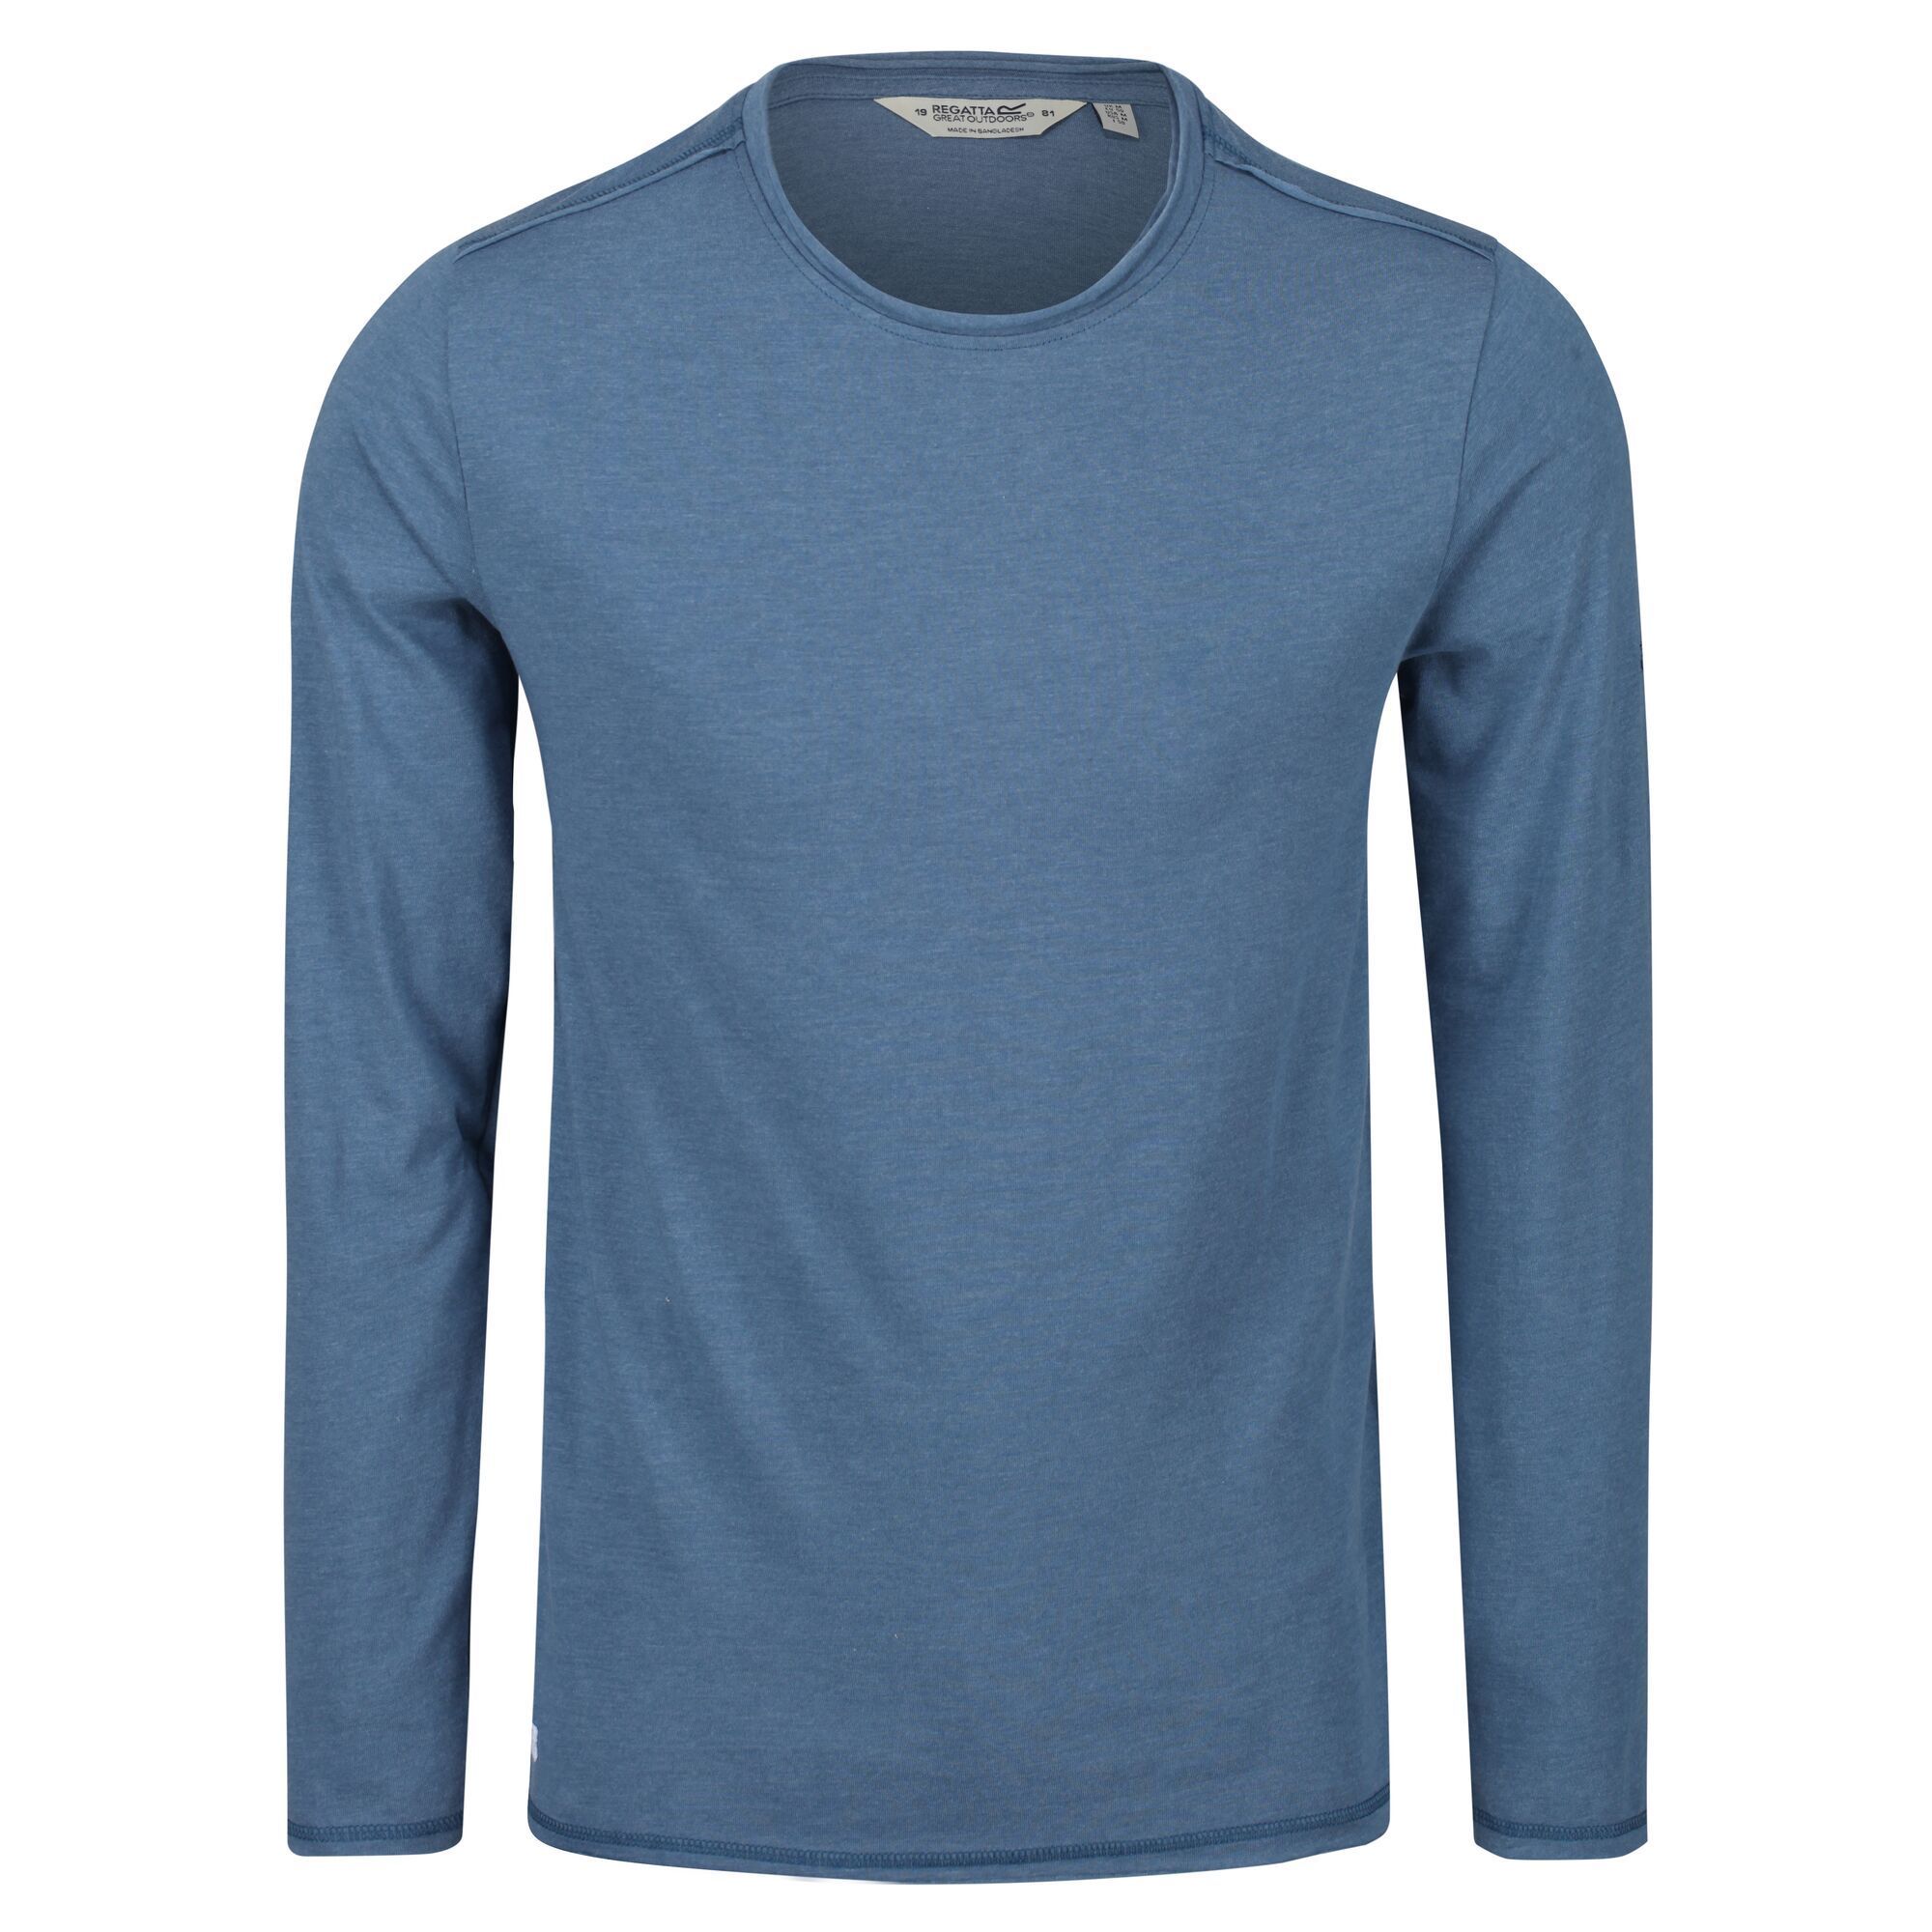 60% Cotton, 40% Polyester. Sustainably sourced, long-sleeved crew neck top made from lightweight organic cotton-blend material. Naturally breathable and light-to-wear.